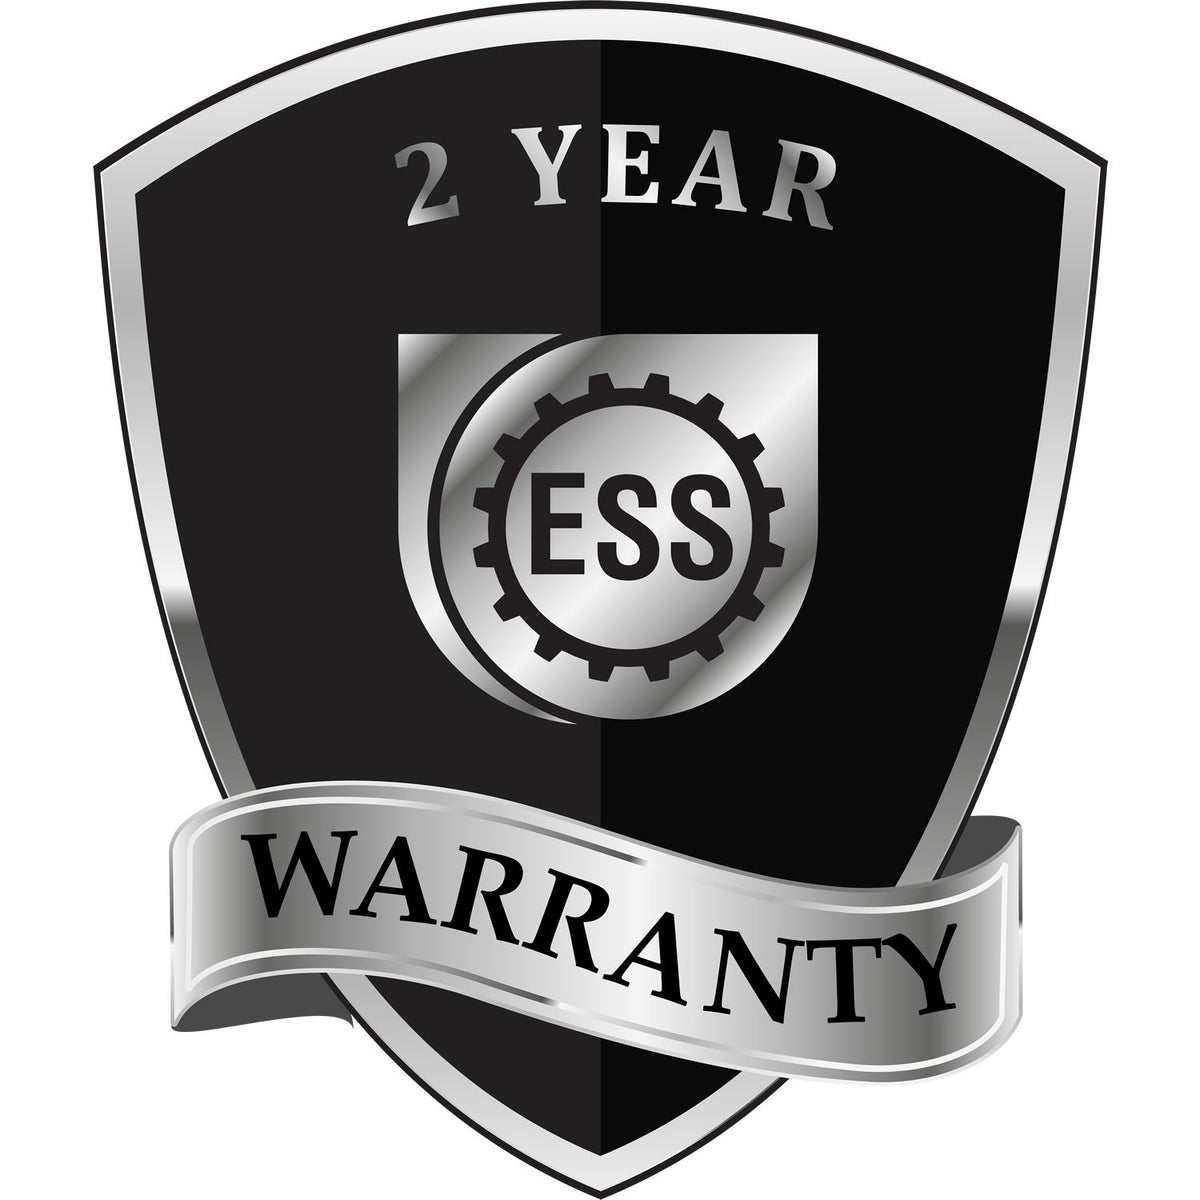 A black and silver badge or emblem showing warranty information for the Long Reach Oregon Geology Seal